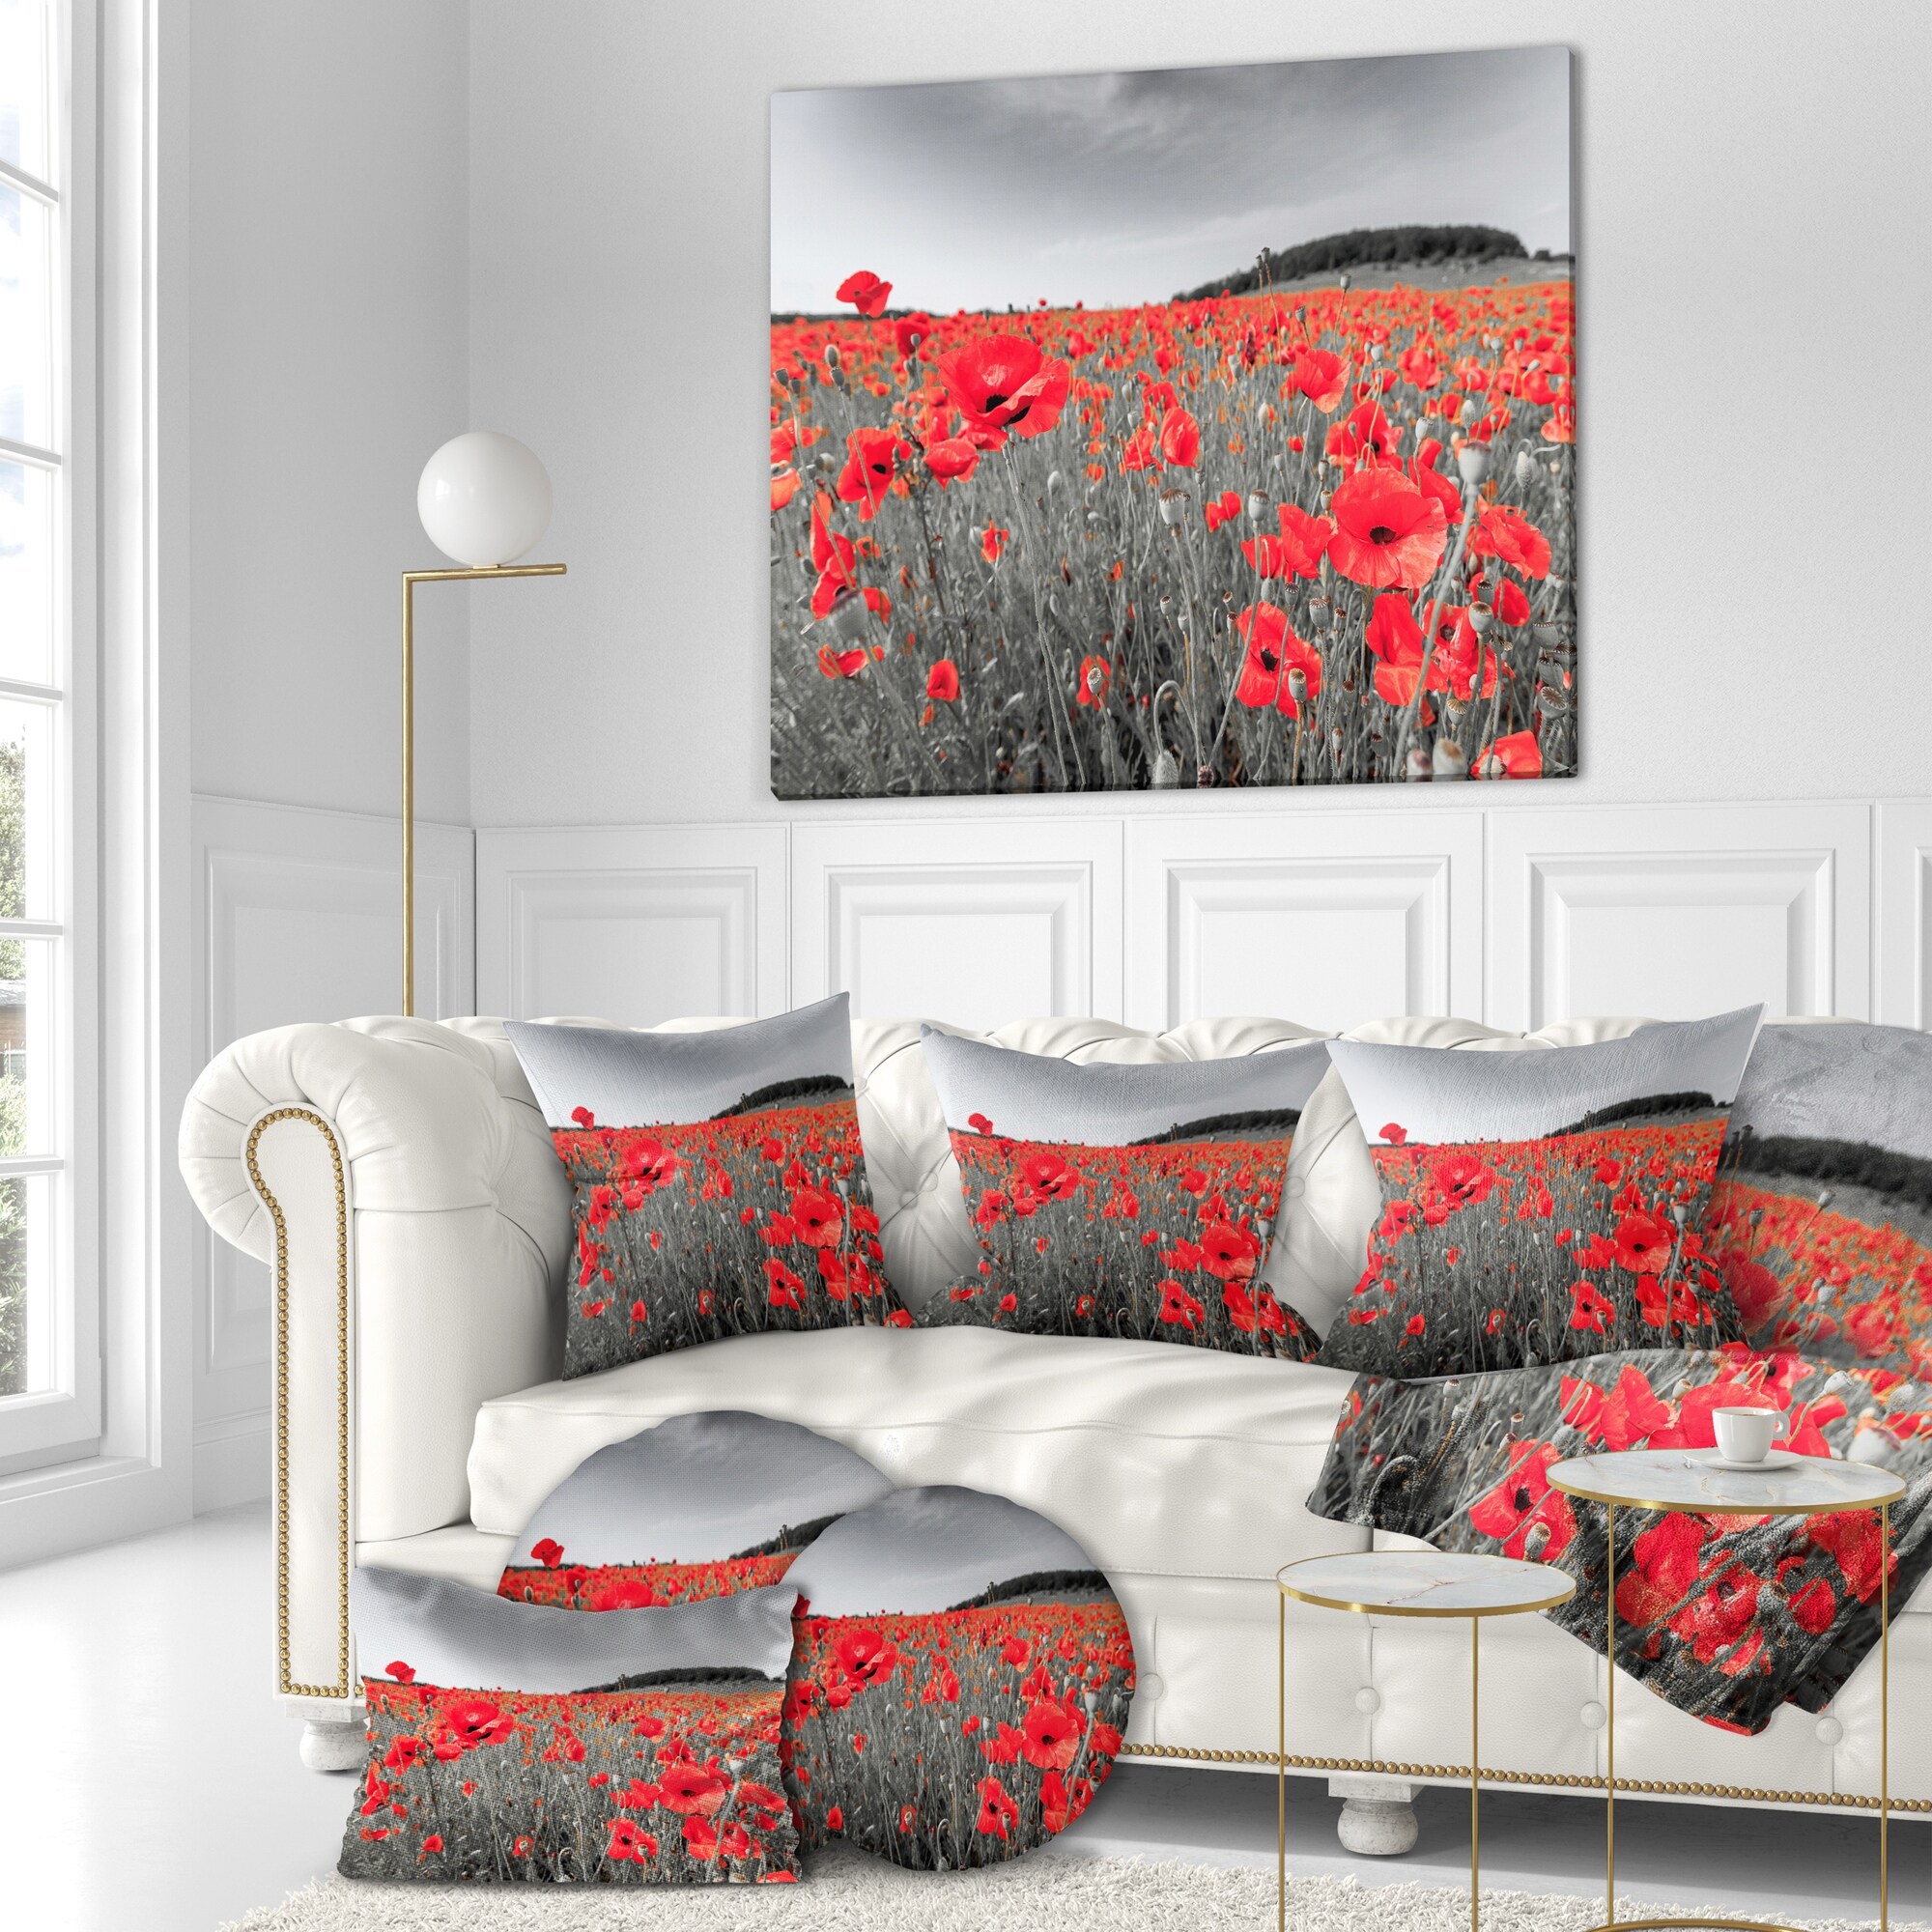 https://ak1.ostkcdn.com/images/products/is/images/direct/dd45f6af06eeee4744b031b19e942022ad65aa49/Designart-%27Red-Poppies-Field%27-Landscapes-Floral-Photographic-on-wrapped-Canvas.jpg